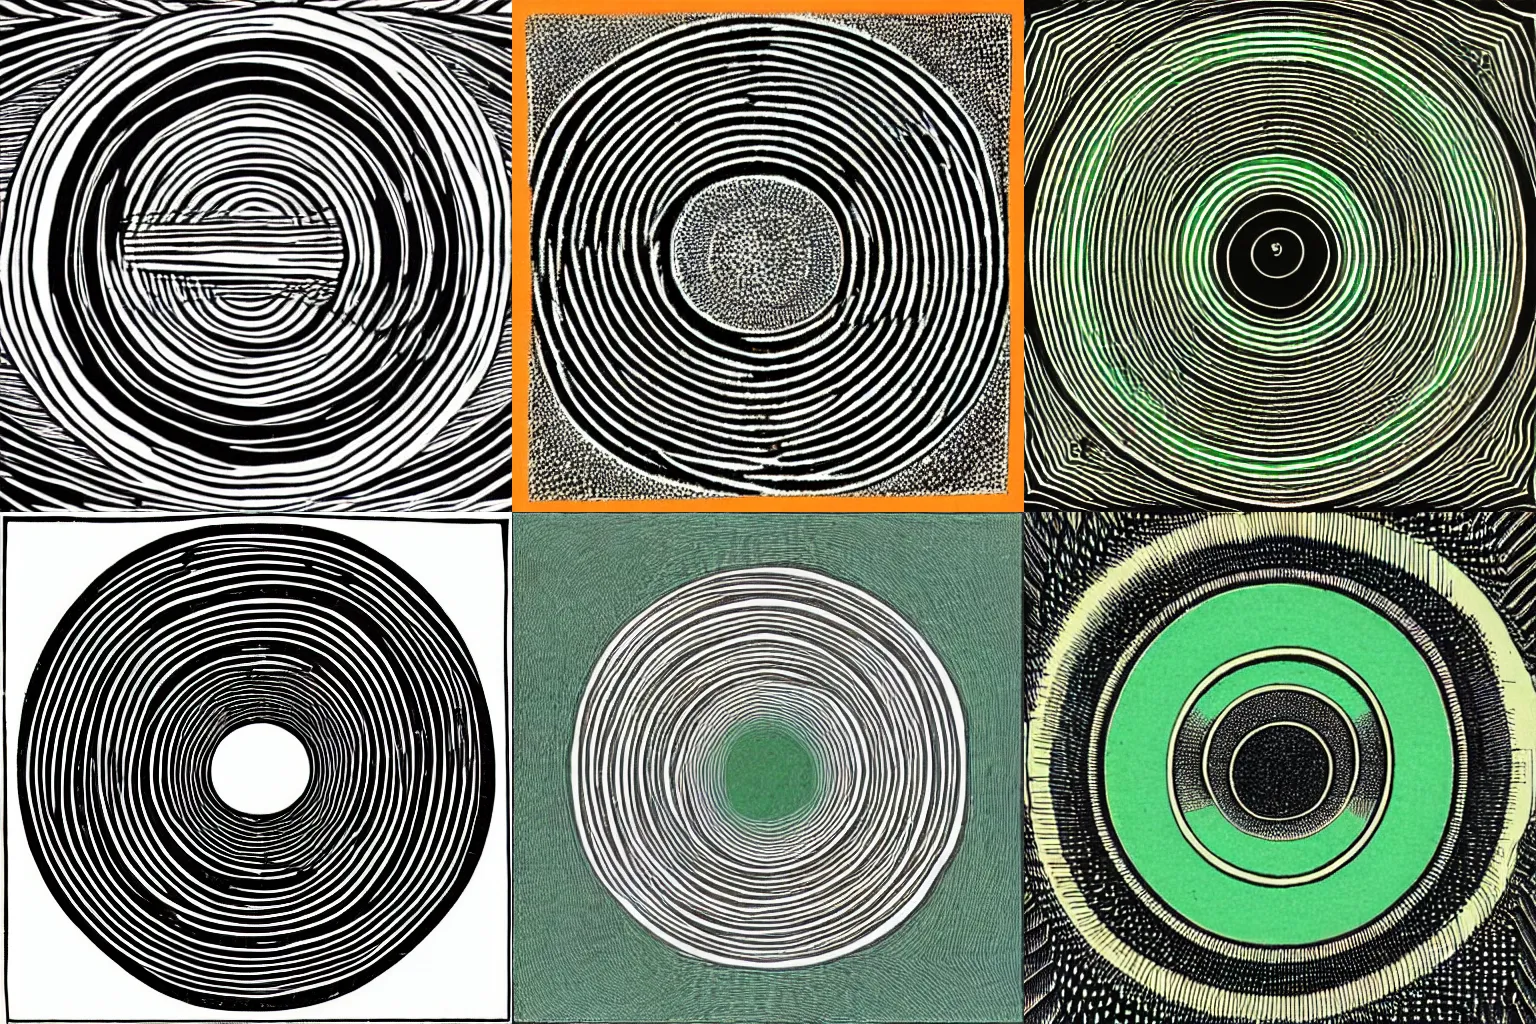 Prompt: Infinitely small rings grow from the center of the circle, reach a maximum size, and then diminish again as they reach the outer circumference. Escher’s woodcut in orange, green, and black.